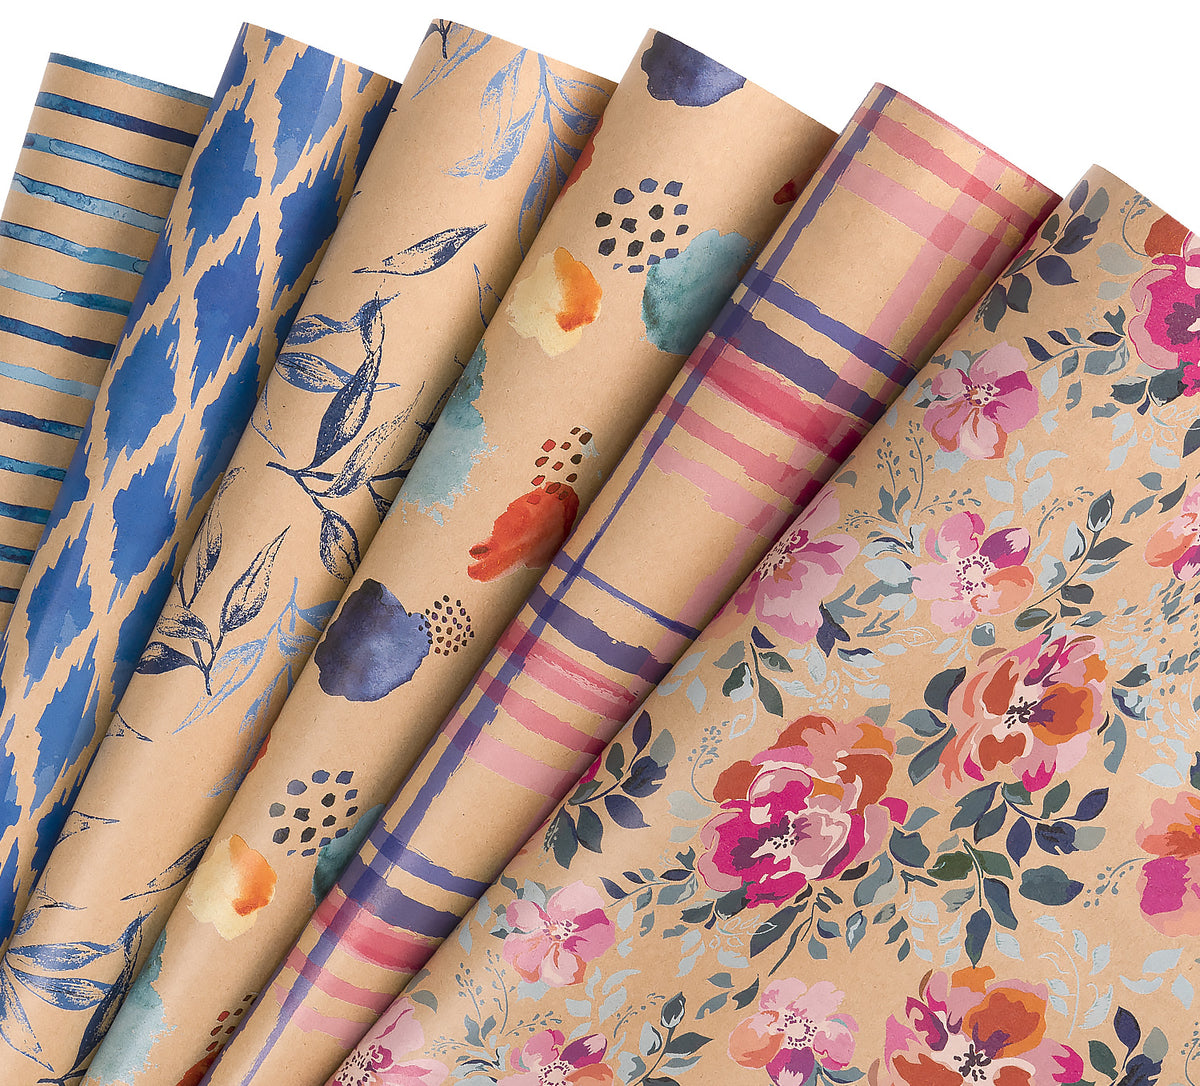 Wrapaholic Black Floral Design Gift Wrapping Paper Roll – WrapaholicGifts